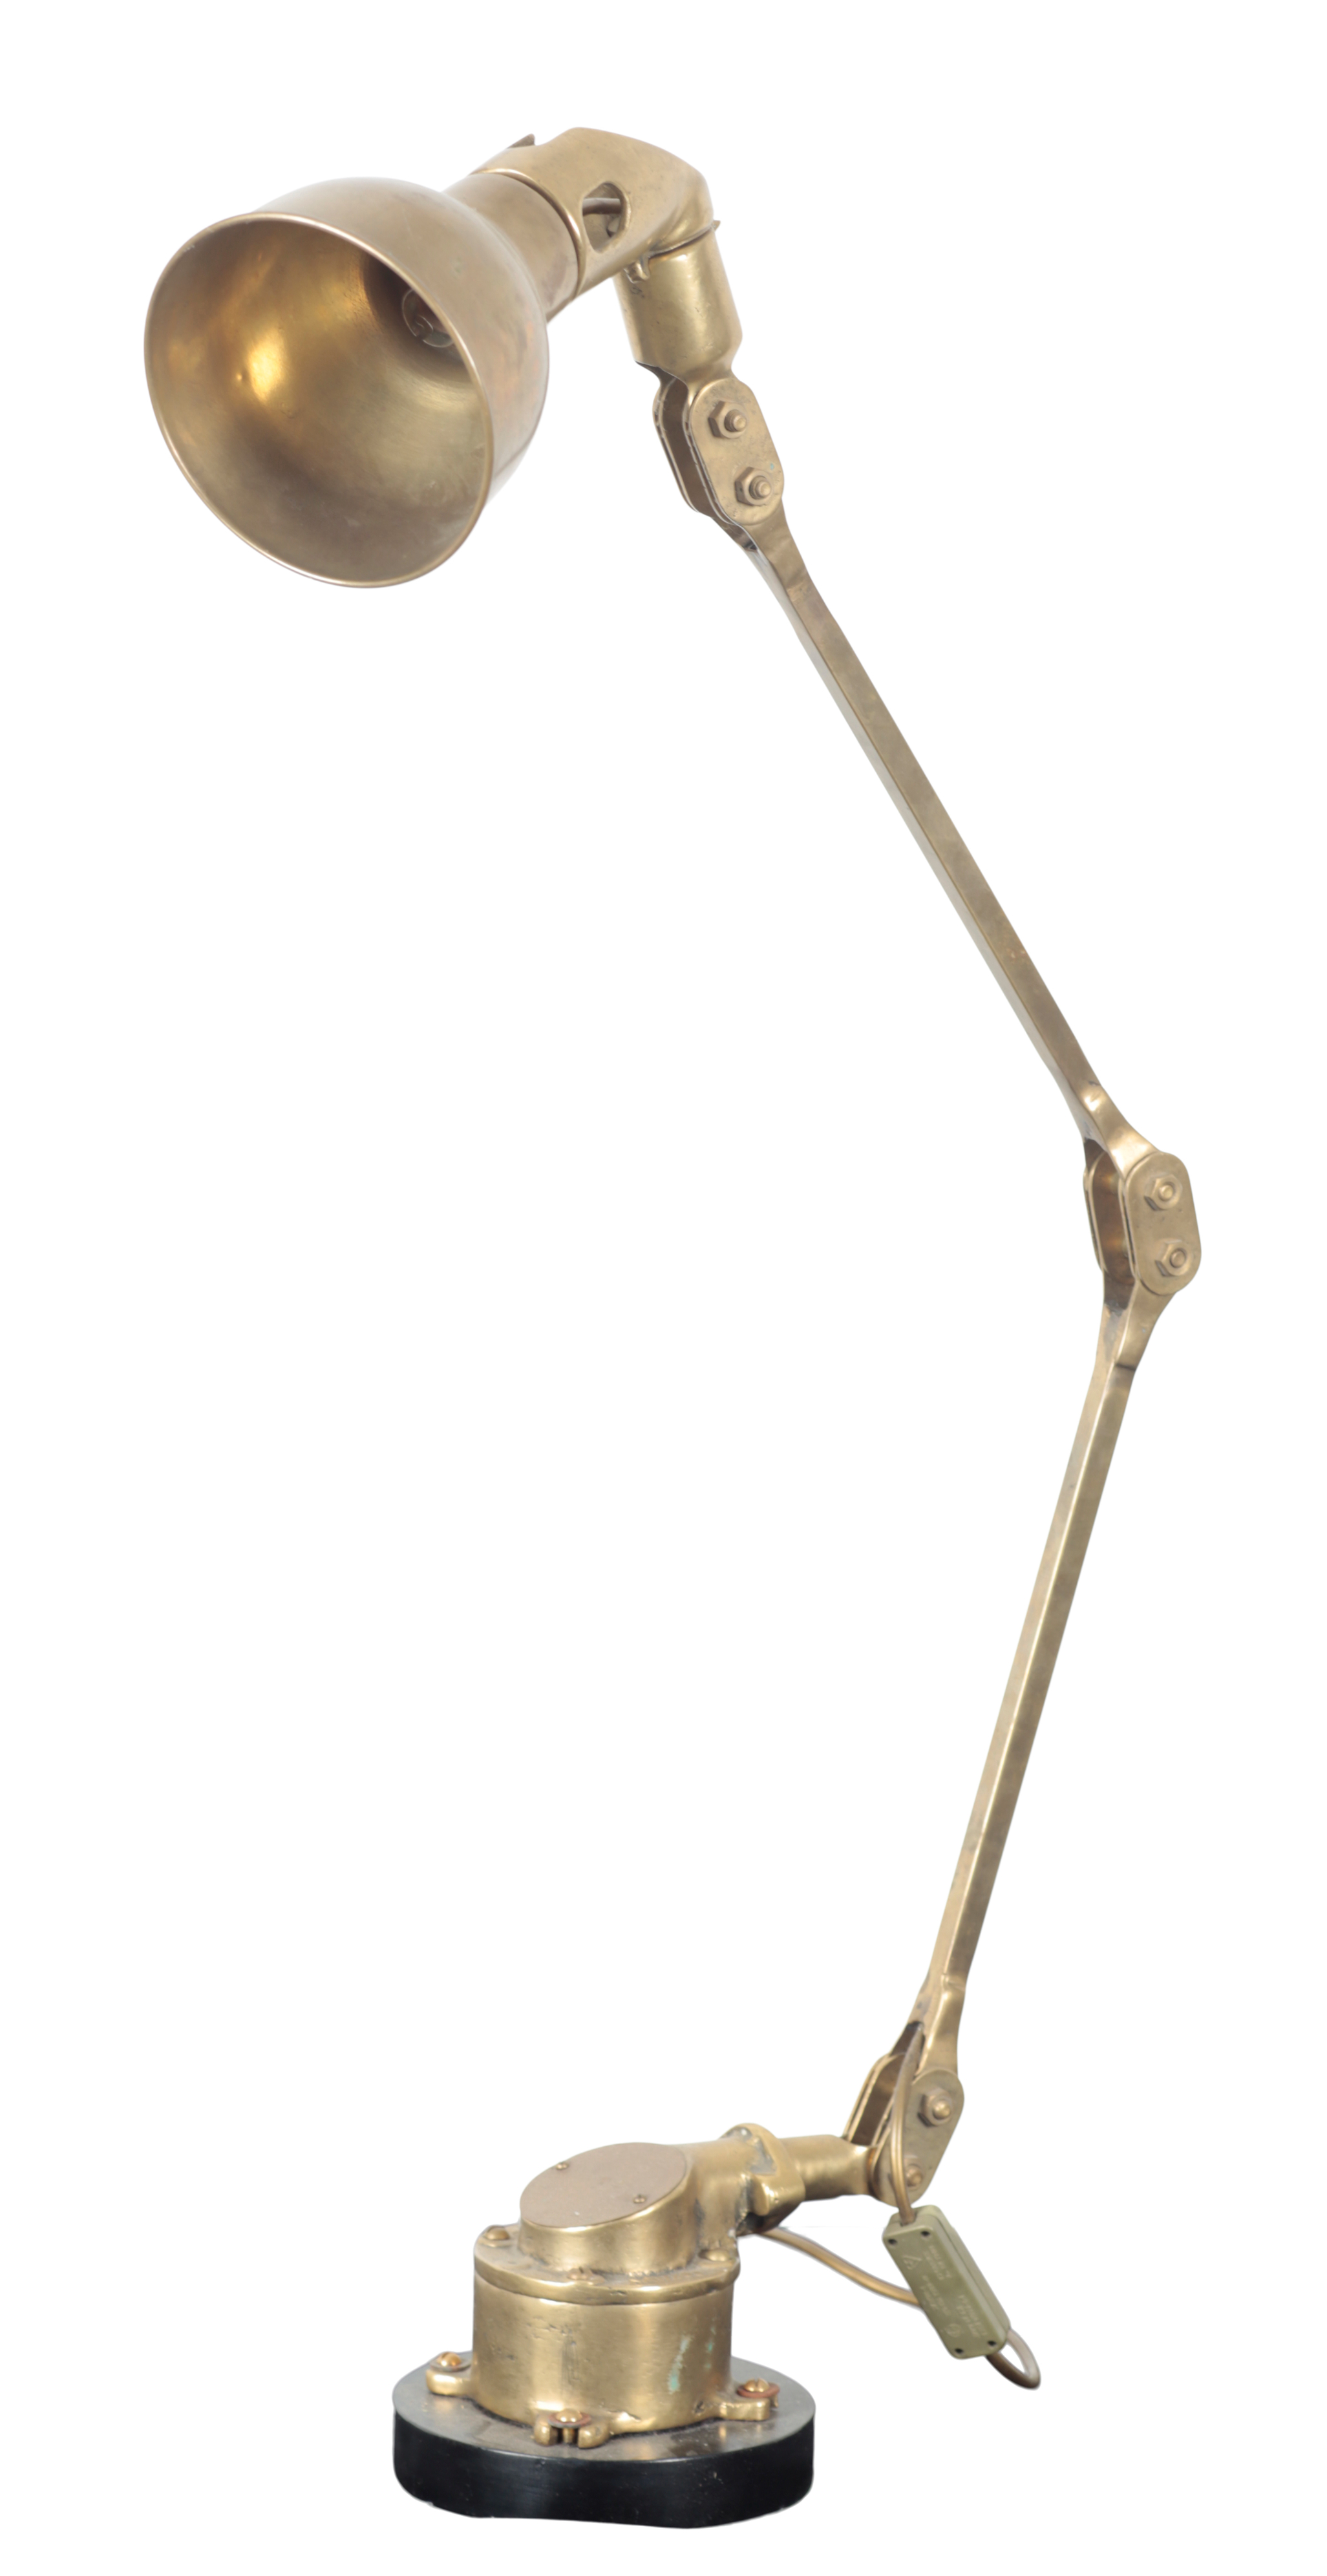 A LARGE SCALE BRASS ANGLEPOISE